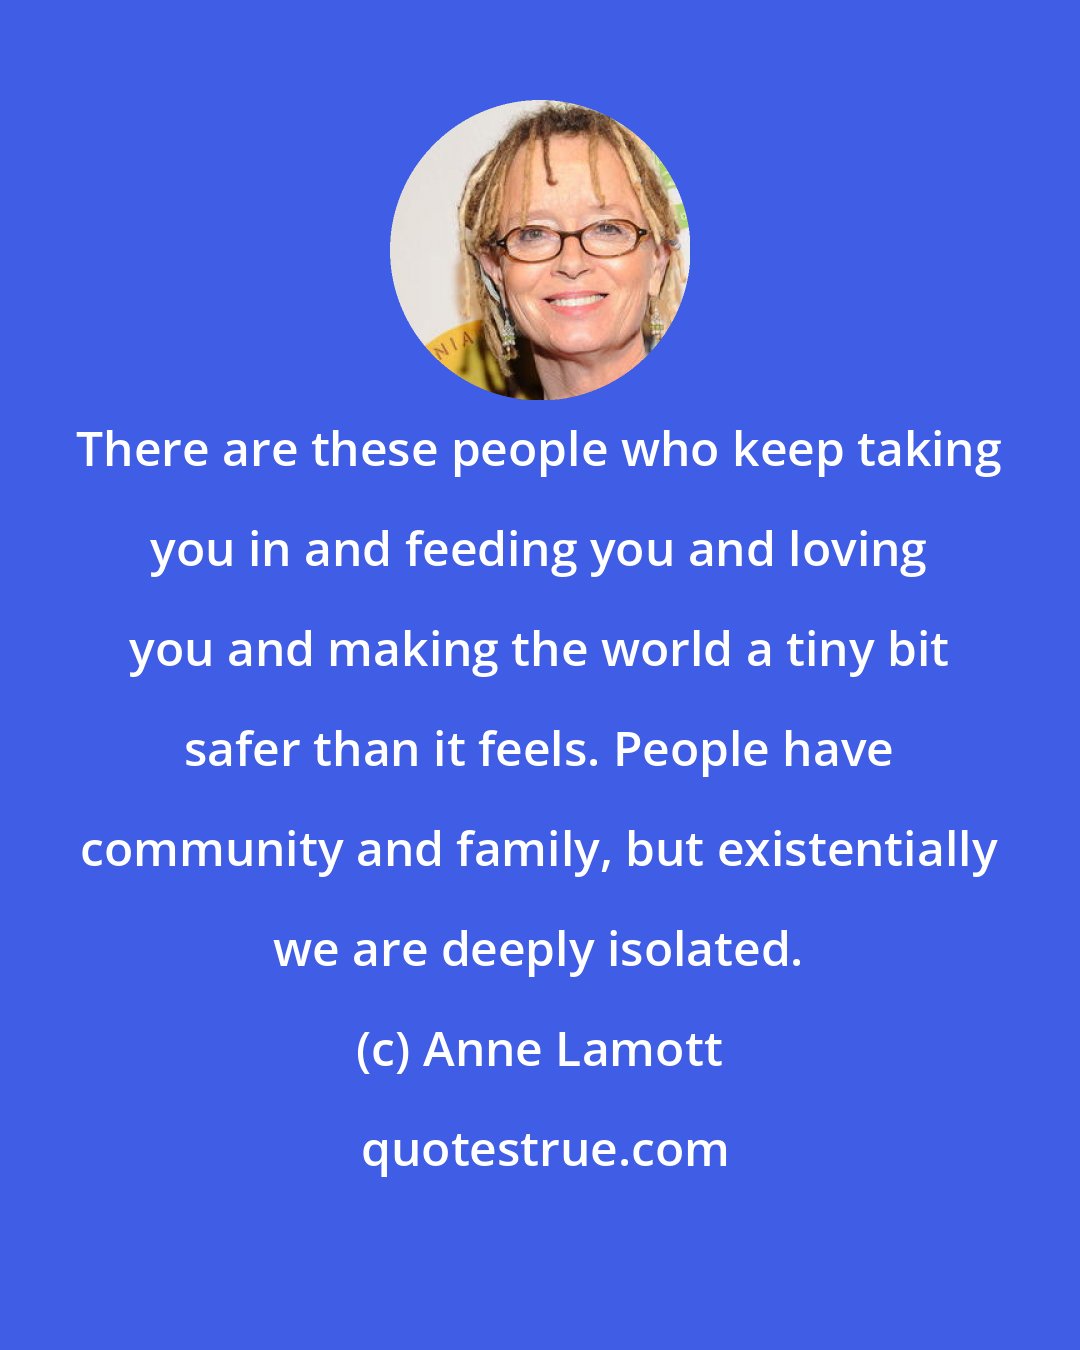 Anne Lamott: There are these people who keep taking you in and feeding you and loving you and making the world a tiny bit safer than it feels. People have community and family, but existentially we are deeply isolated.